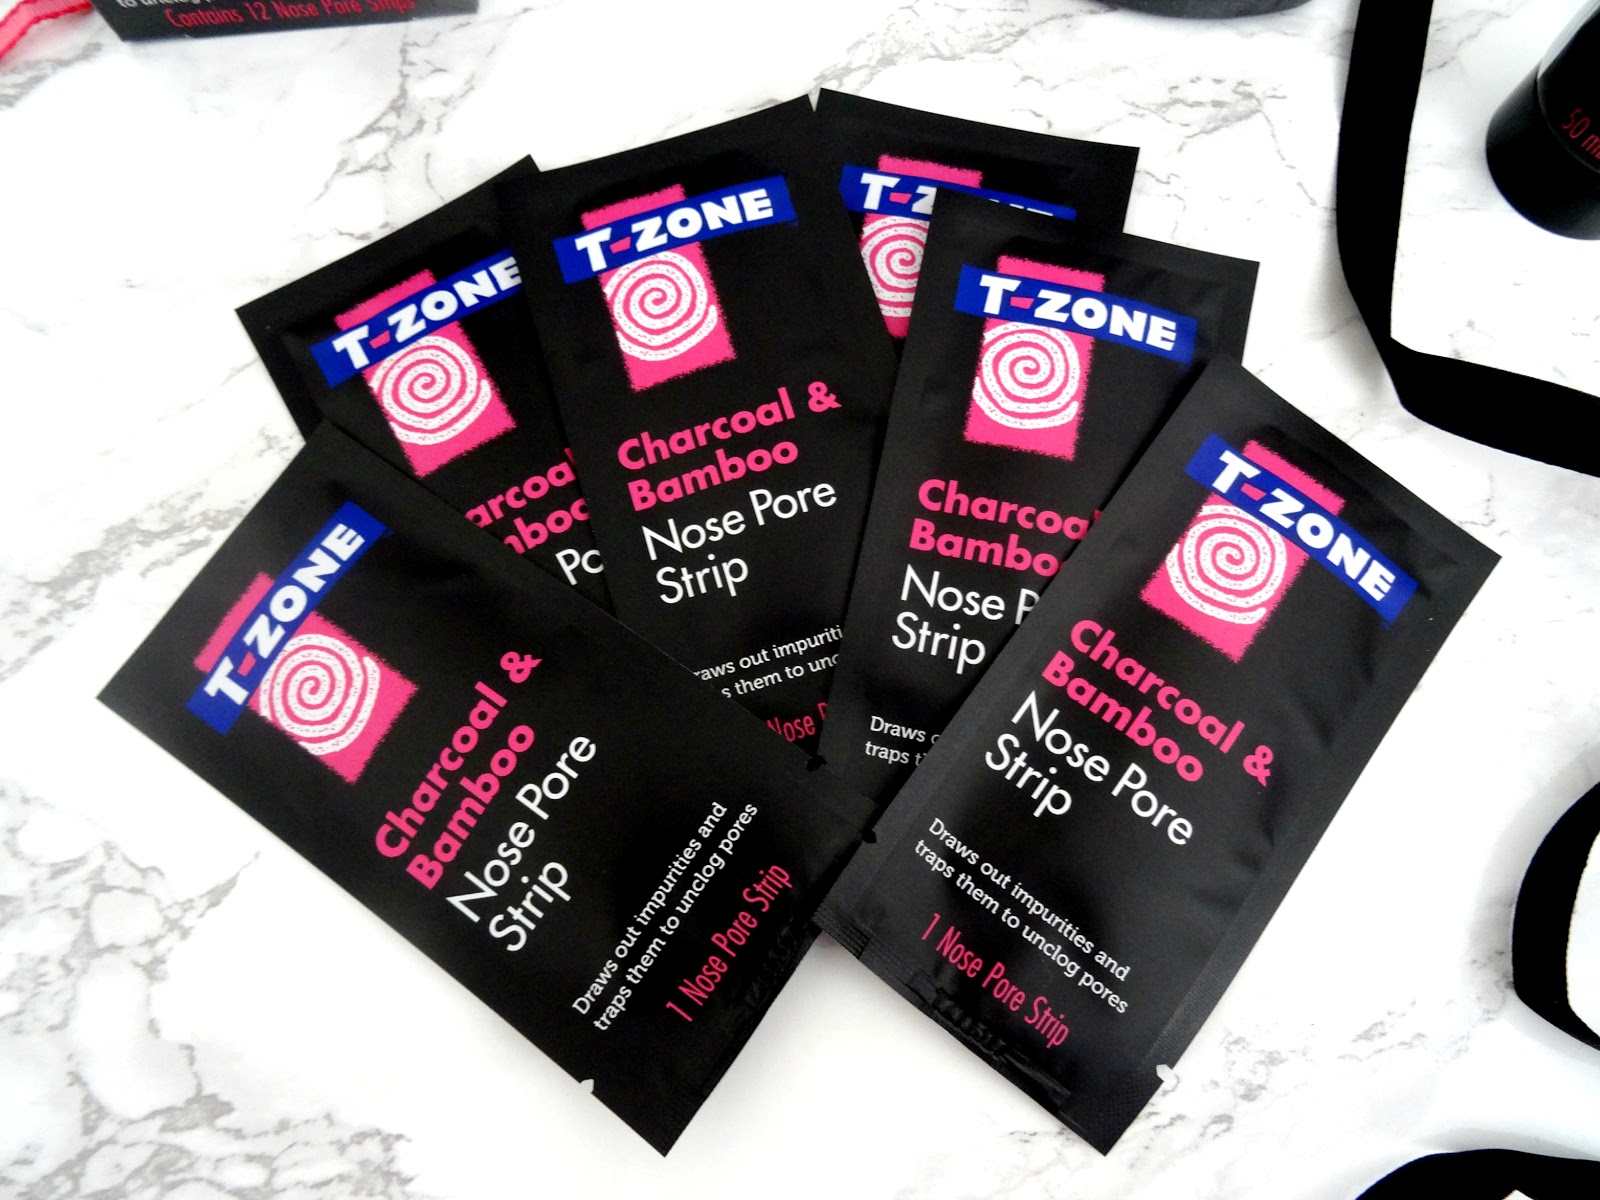 T-Zone Charcoal&Bamboo Nose Pore Strips Review